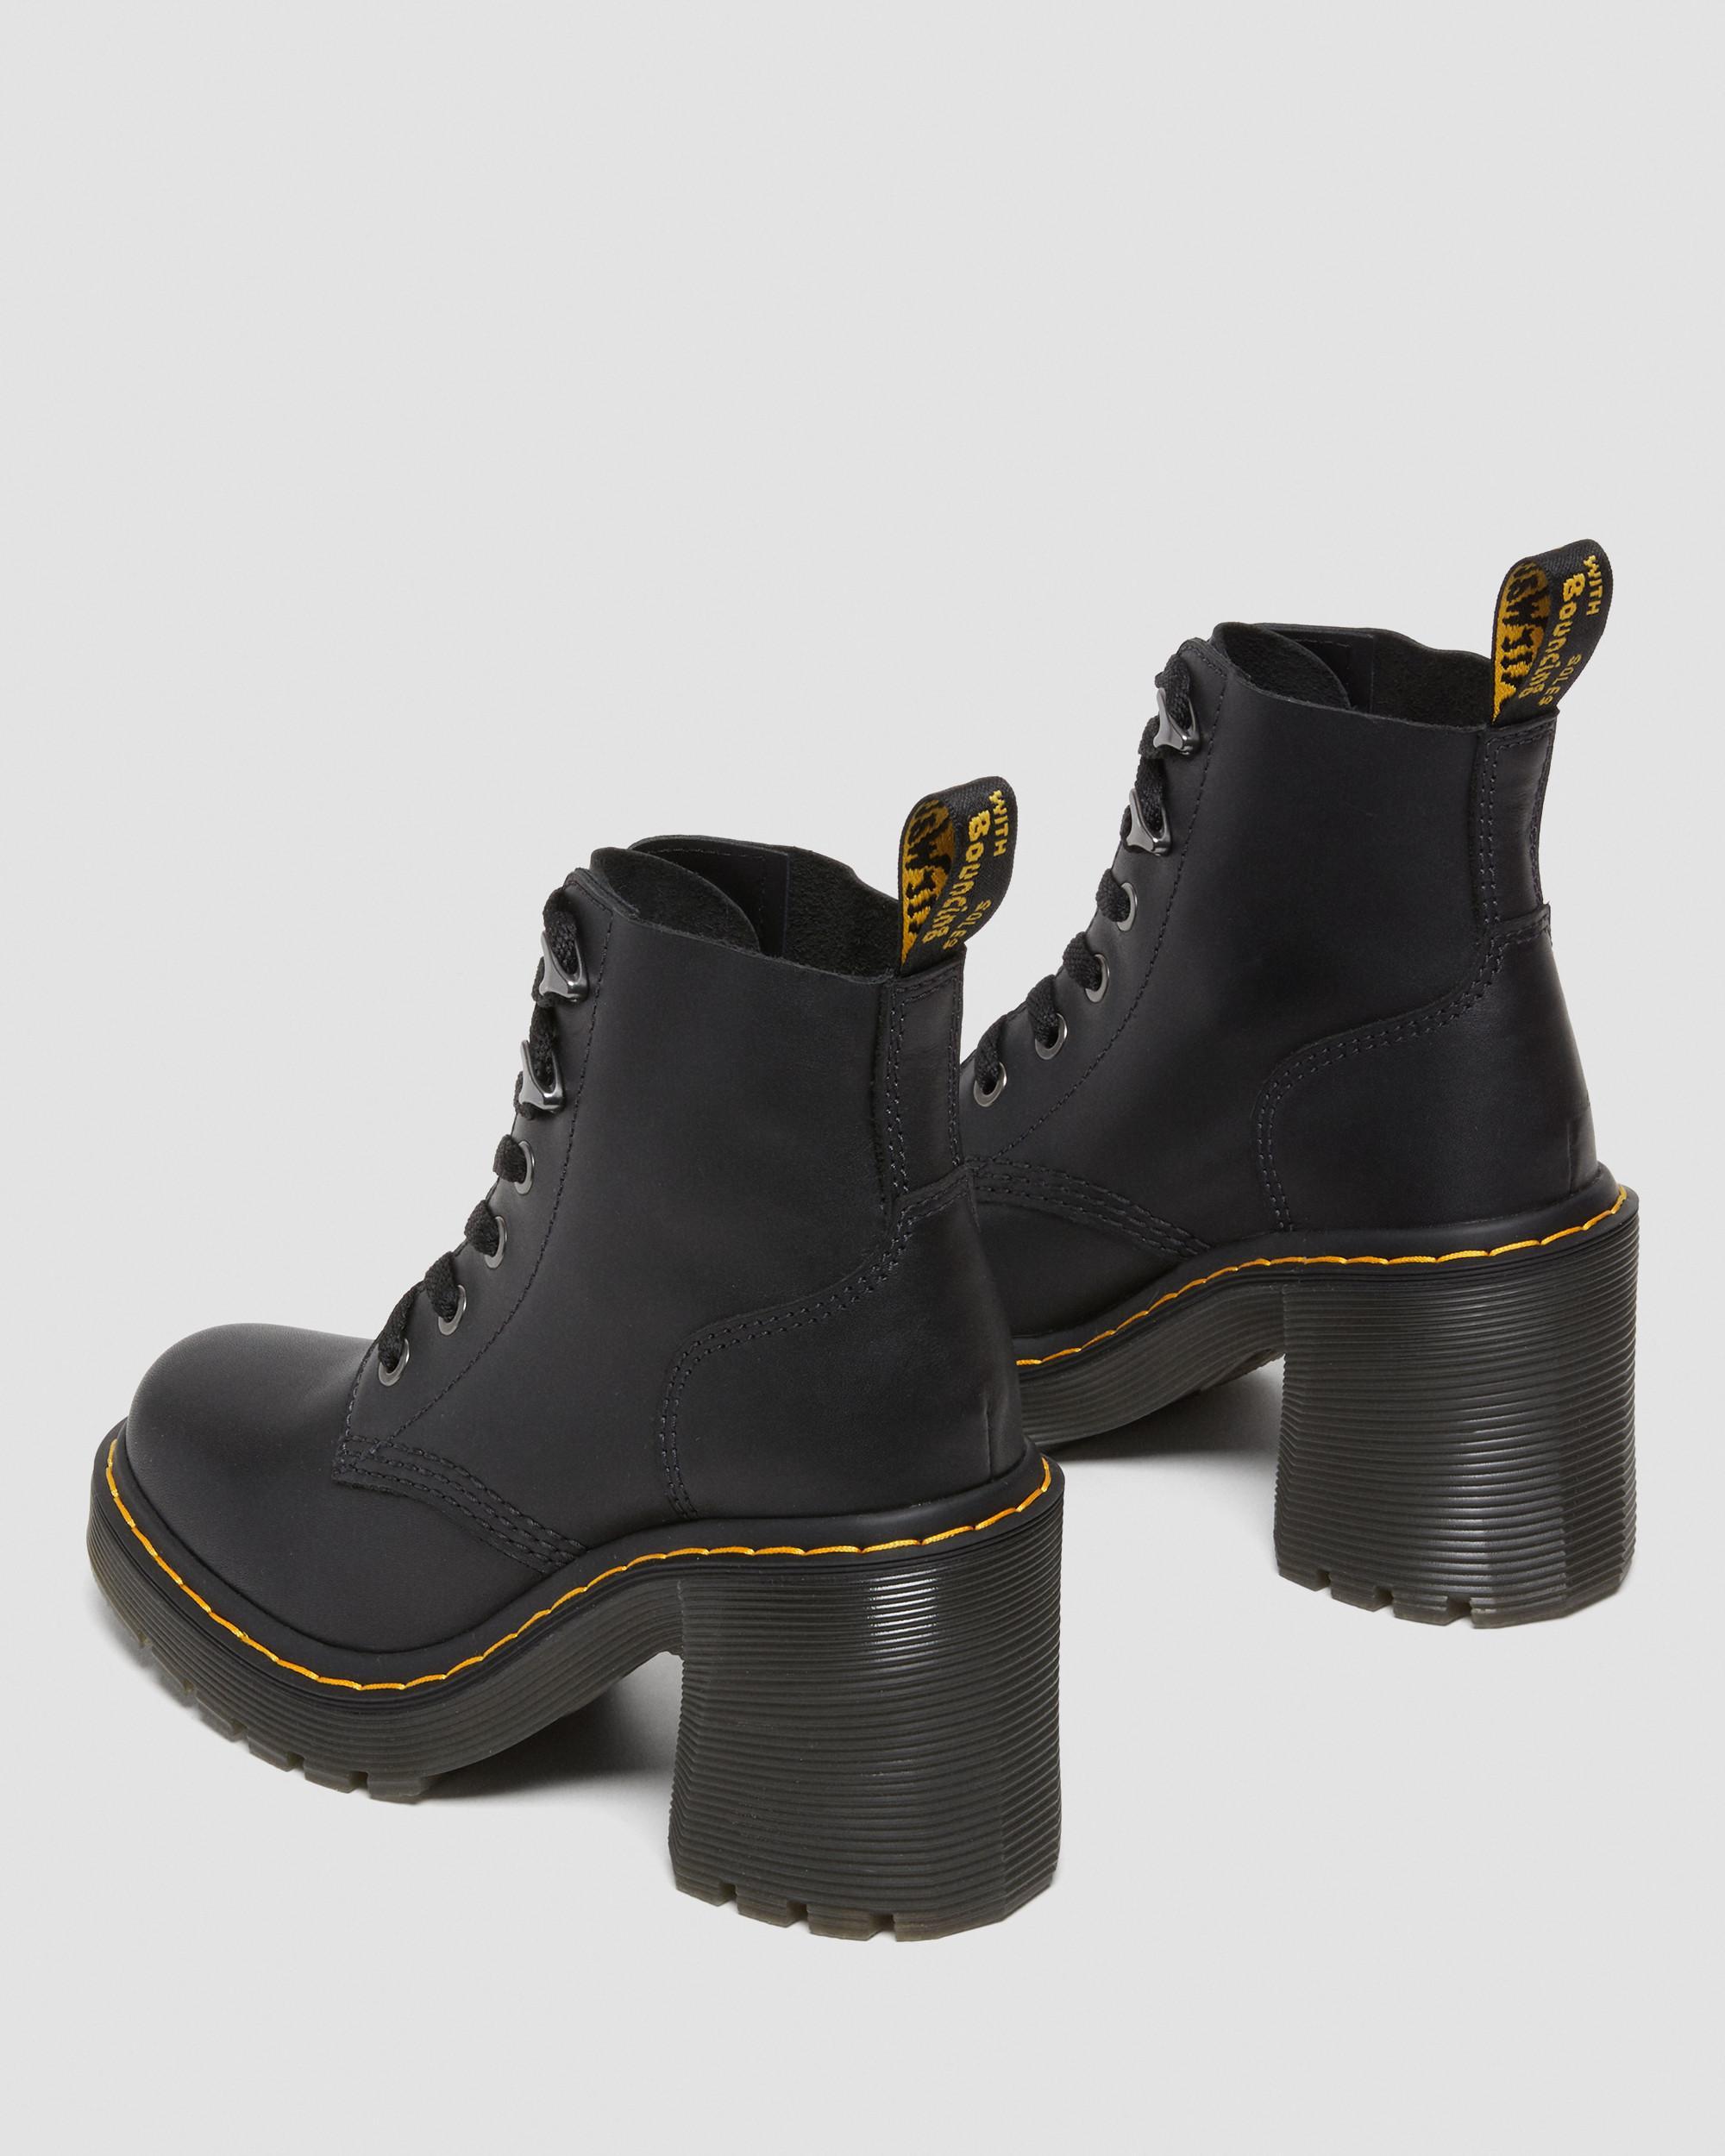 Dr. Martens Jesy Sendal Leather Lace Up Flared Heel Boots in Black | Lyst